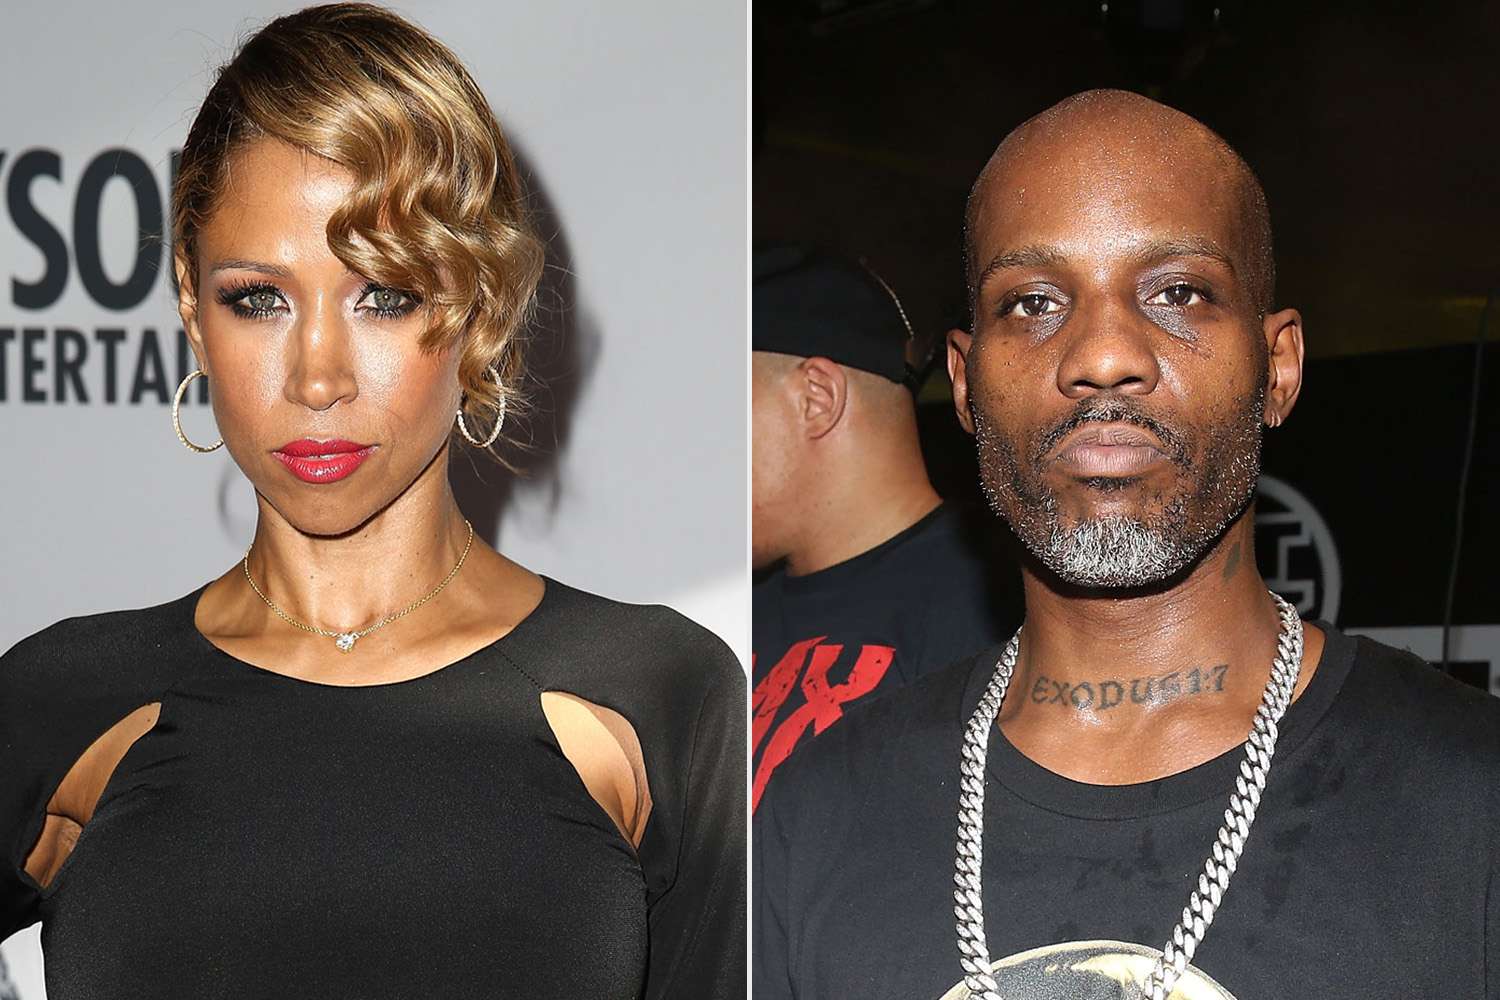 Stacey Dash attends the premiere of Lionsgate Films' 'America'; DMX attends HOT 97 Summer Jam 2017